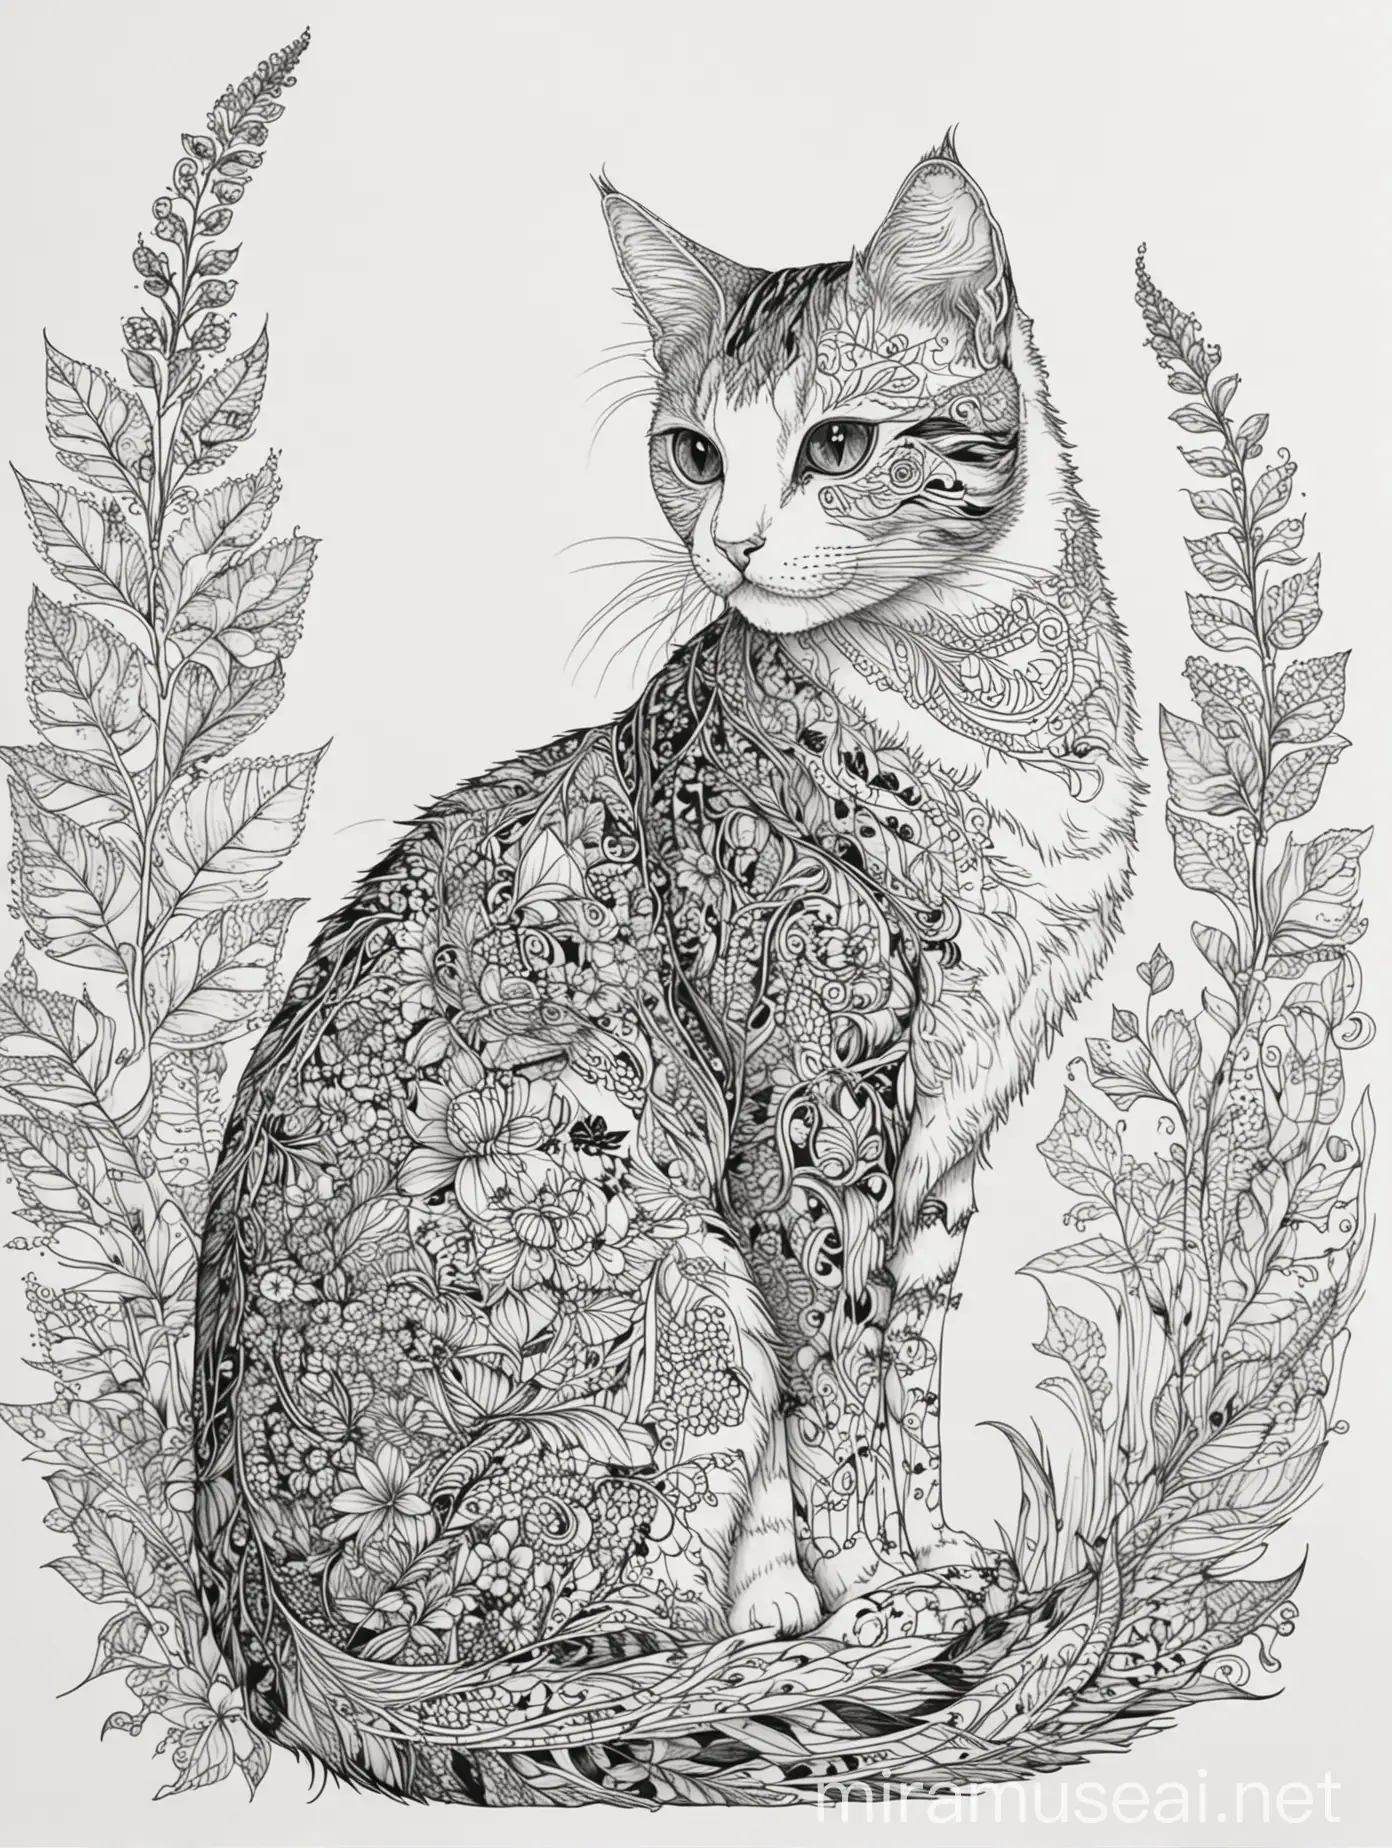 Zen Cat Adult Coloring Page Side Pose with Floral Zentangle Art